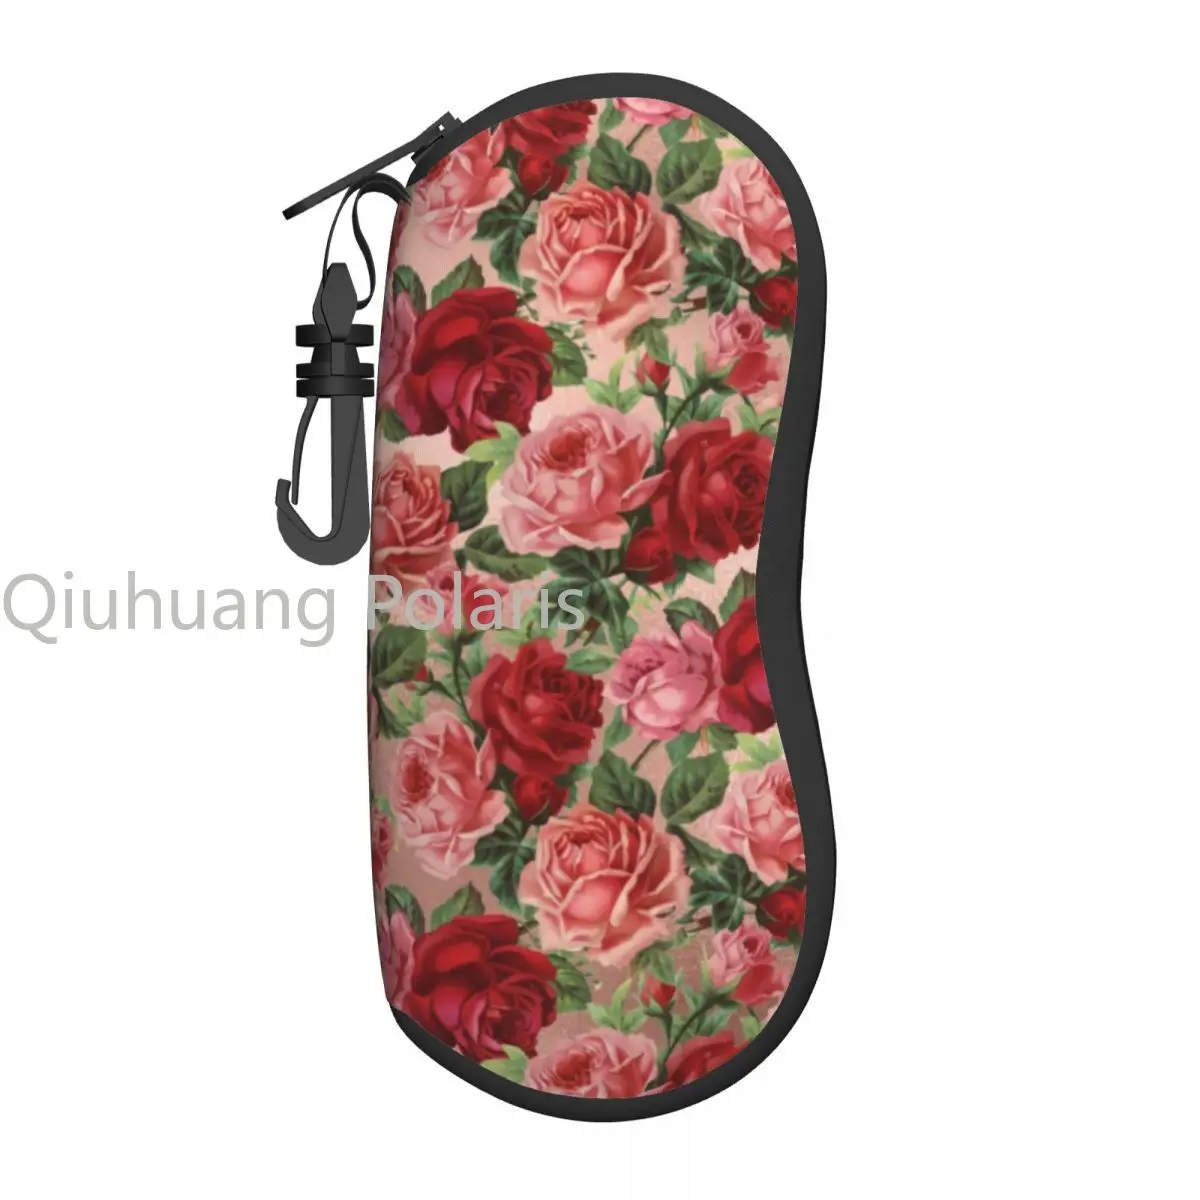 

Vintage Floral Print Vertical Glasses Case Elegant Red Roses Pocket Personalized Sunglasses Pouch Convenient Eyewear Accessory